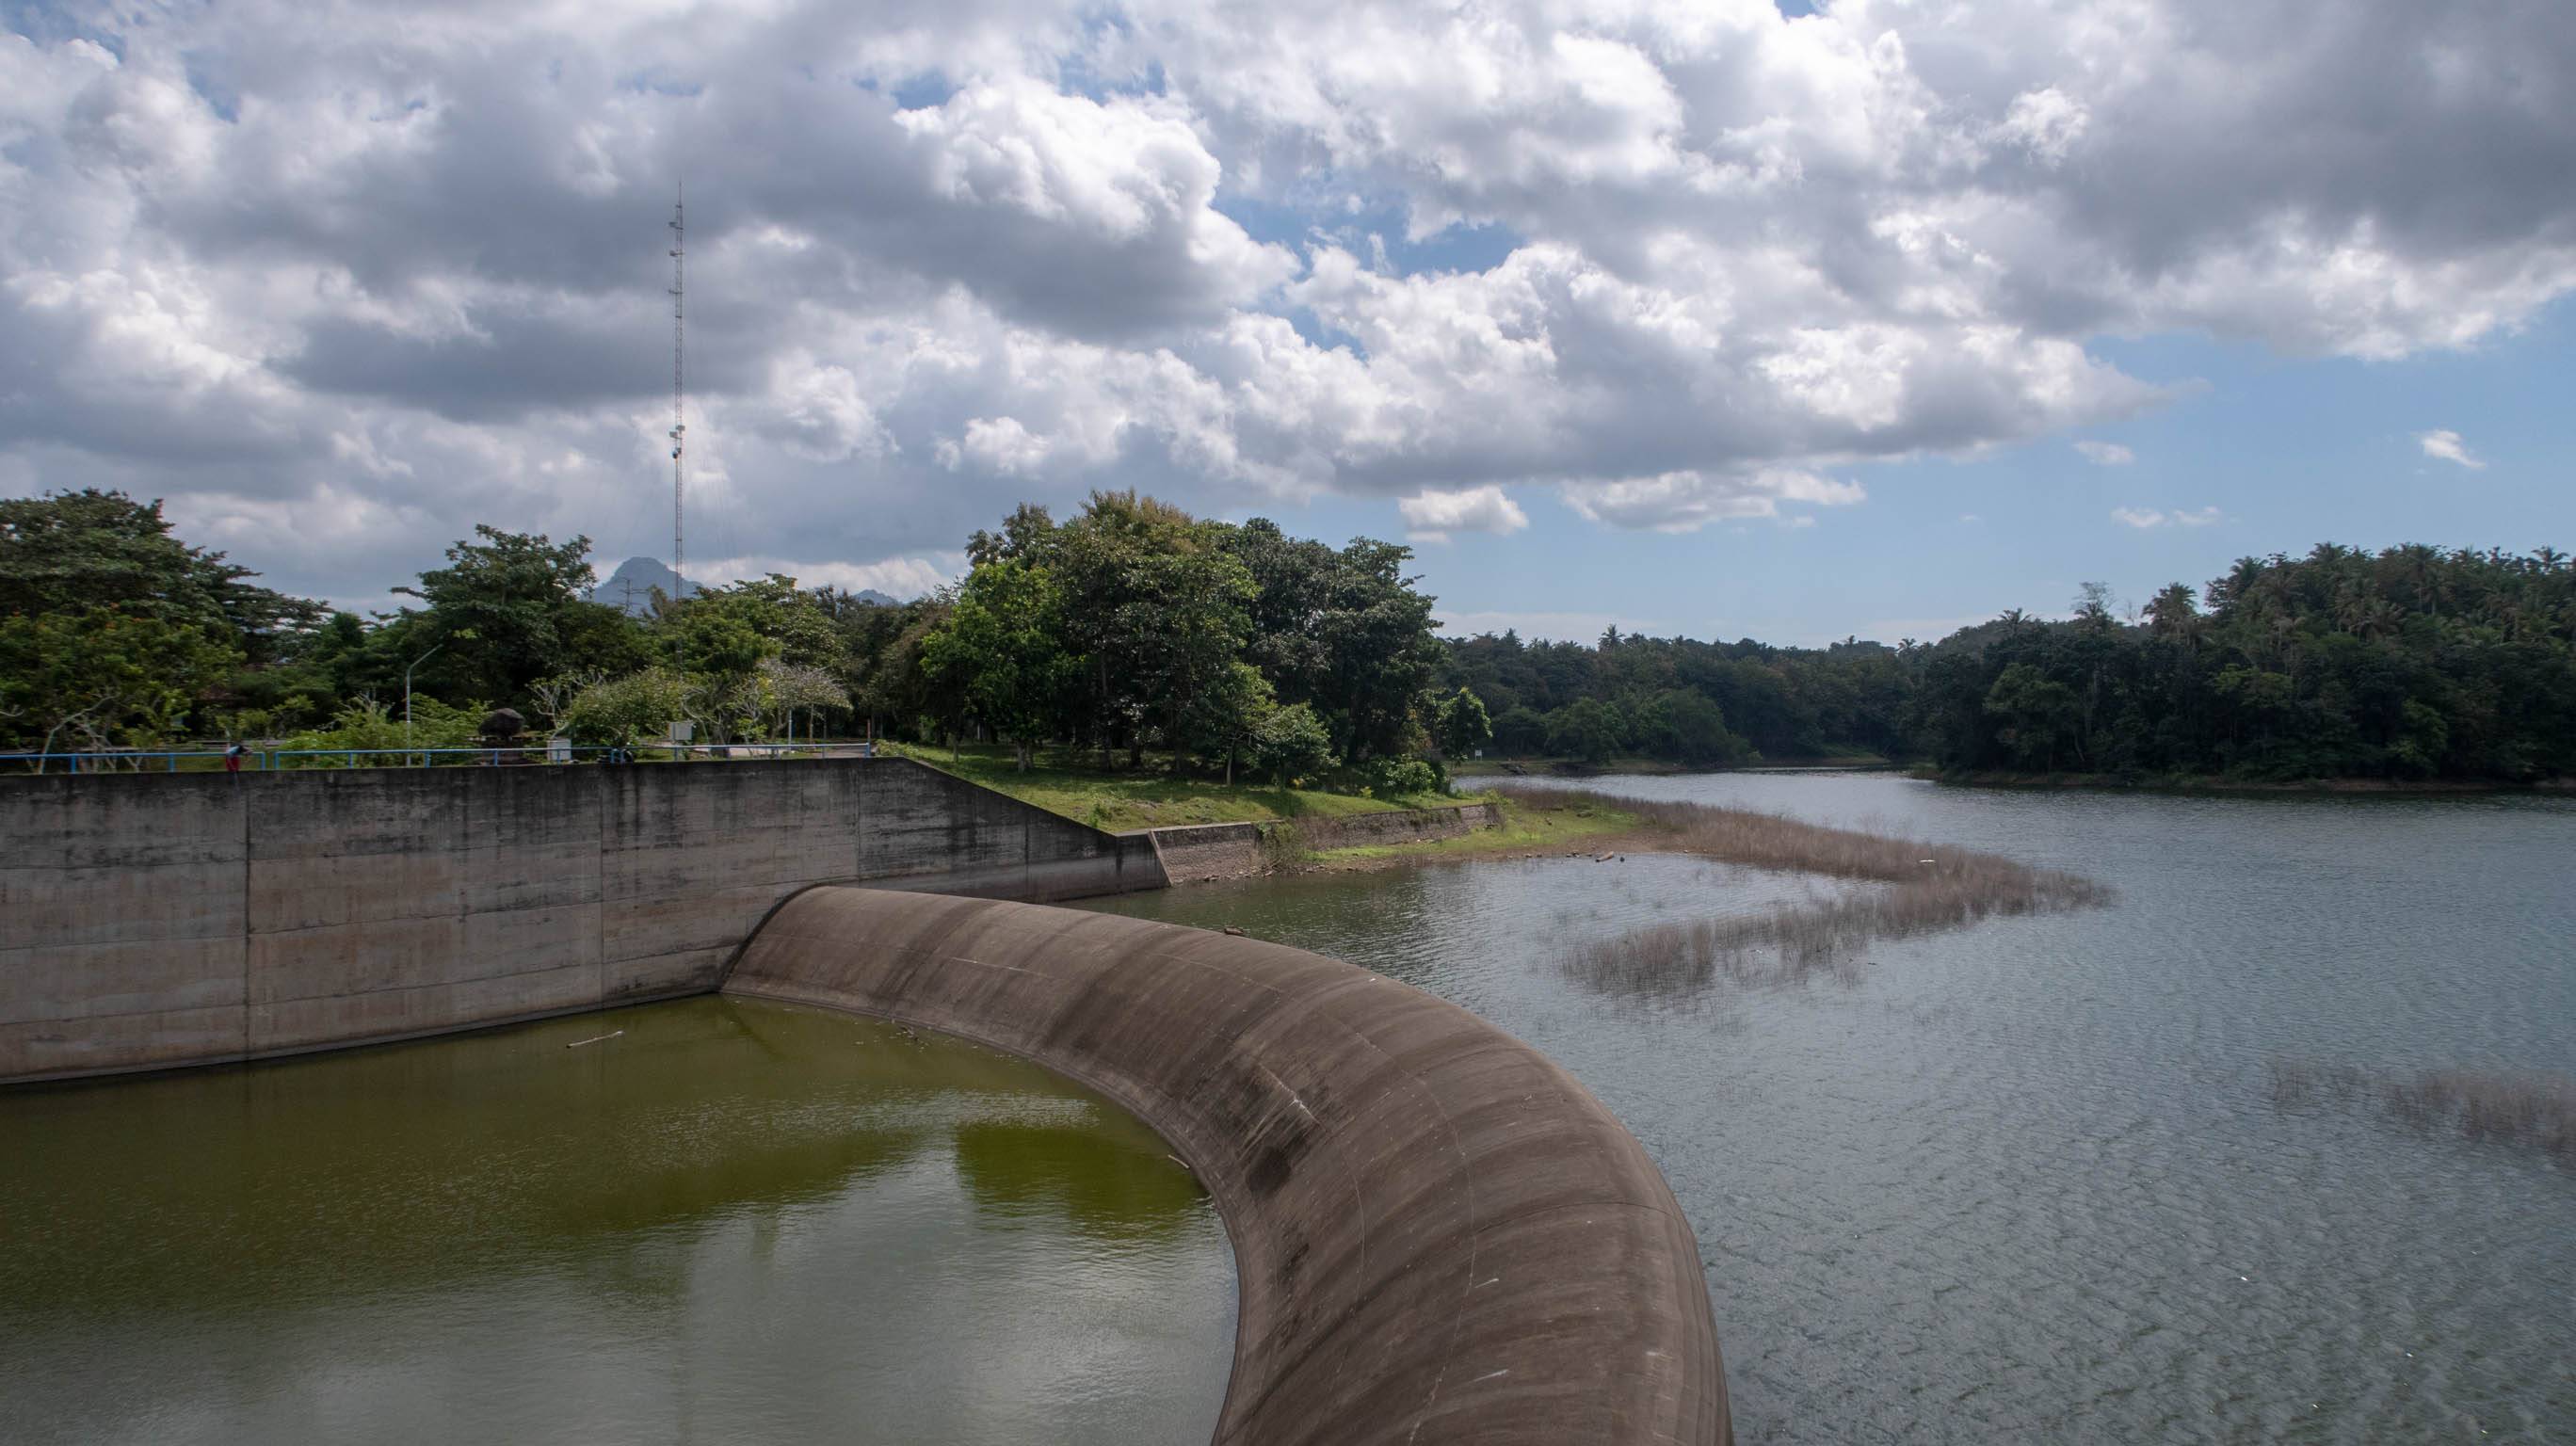 The Palasari dam where water is collected for farming